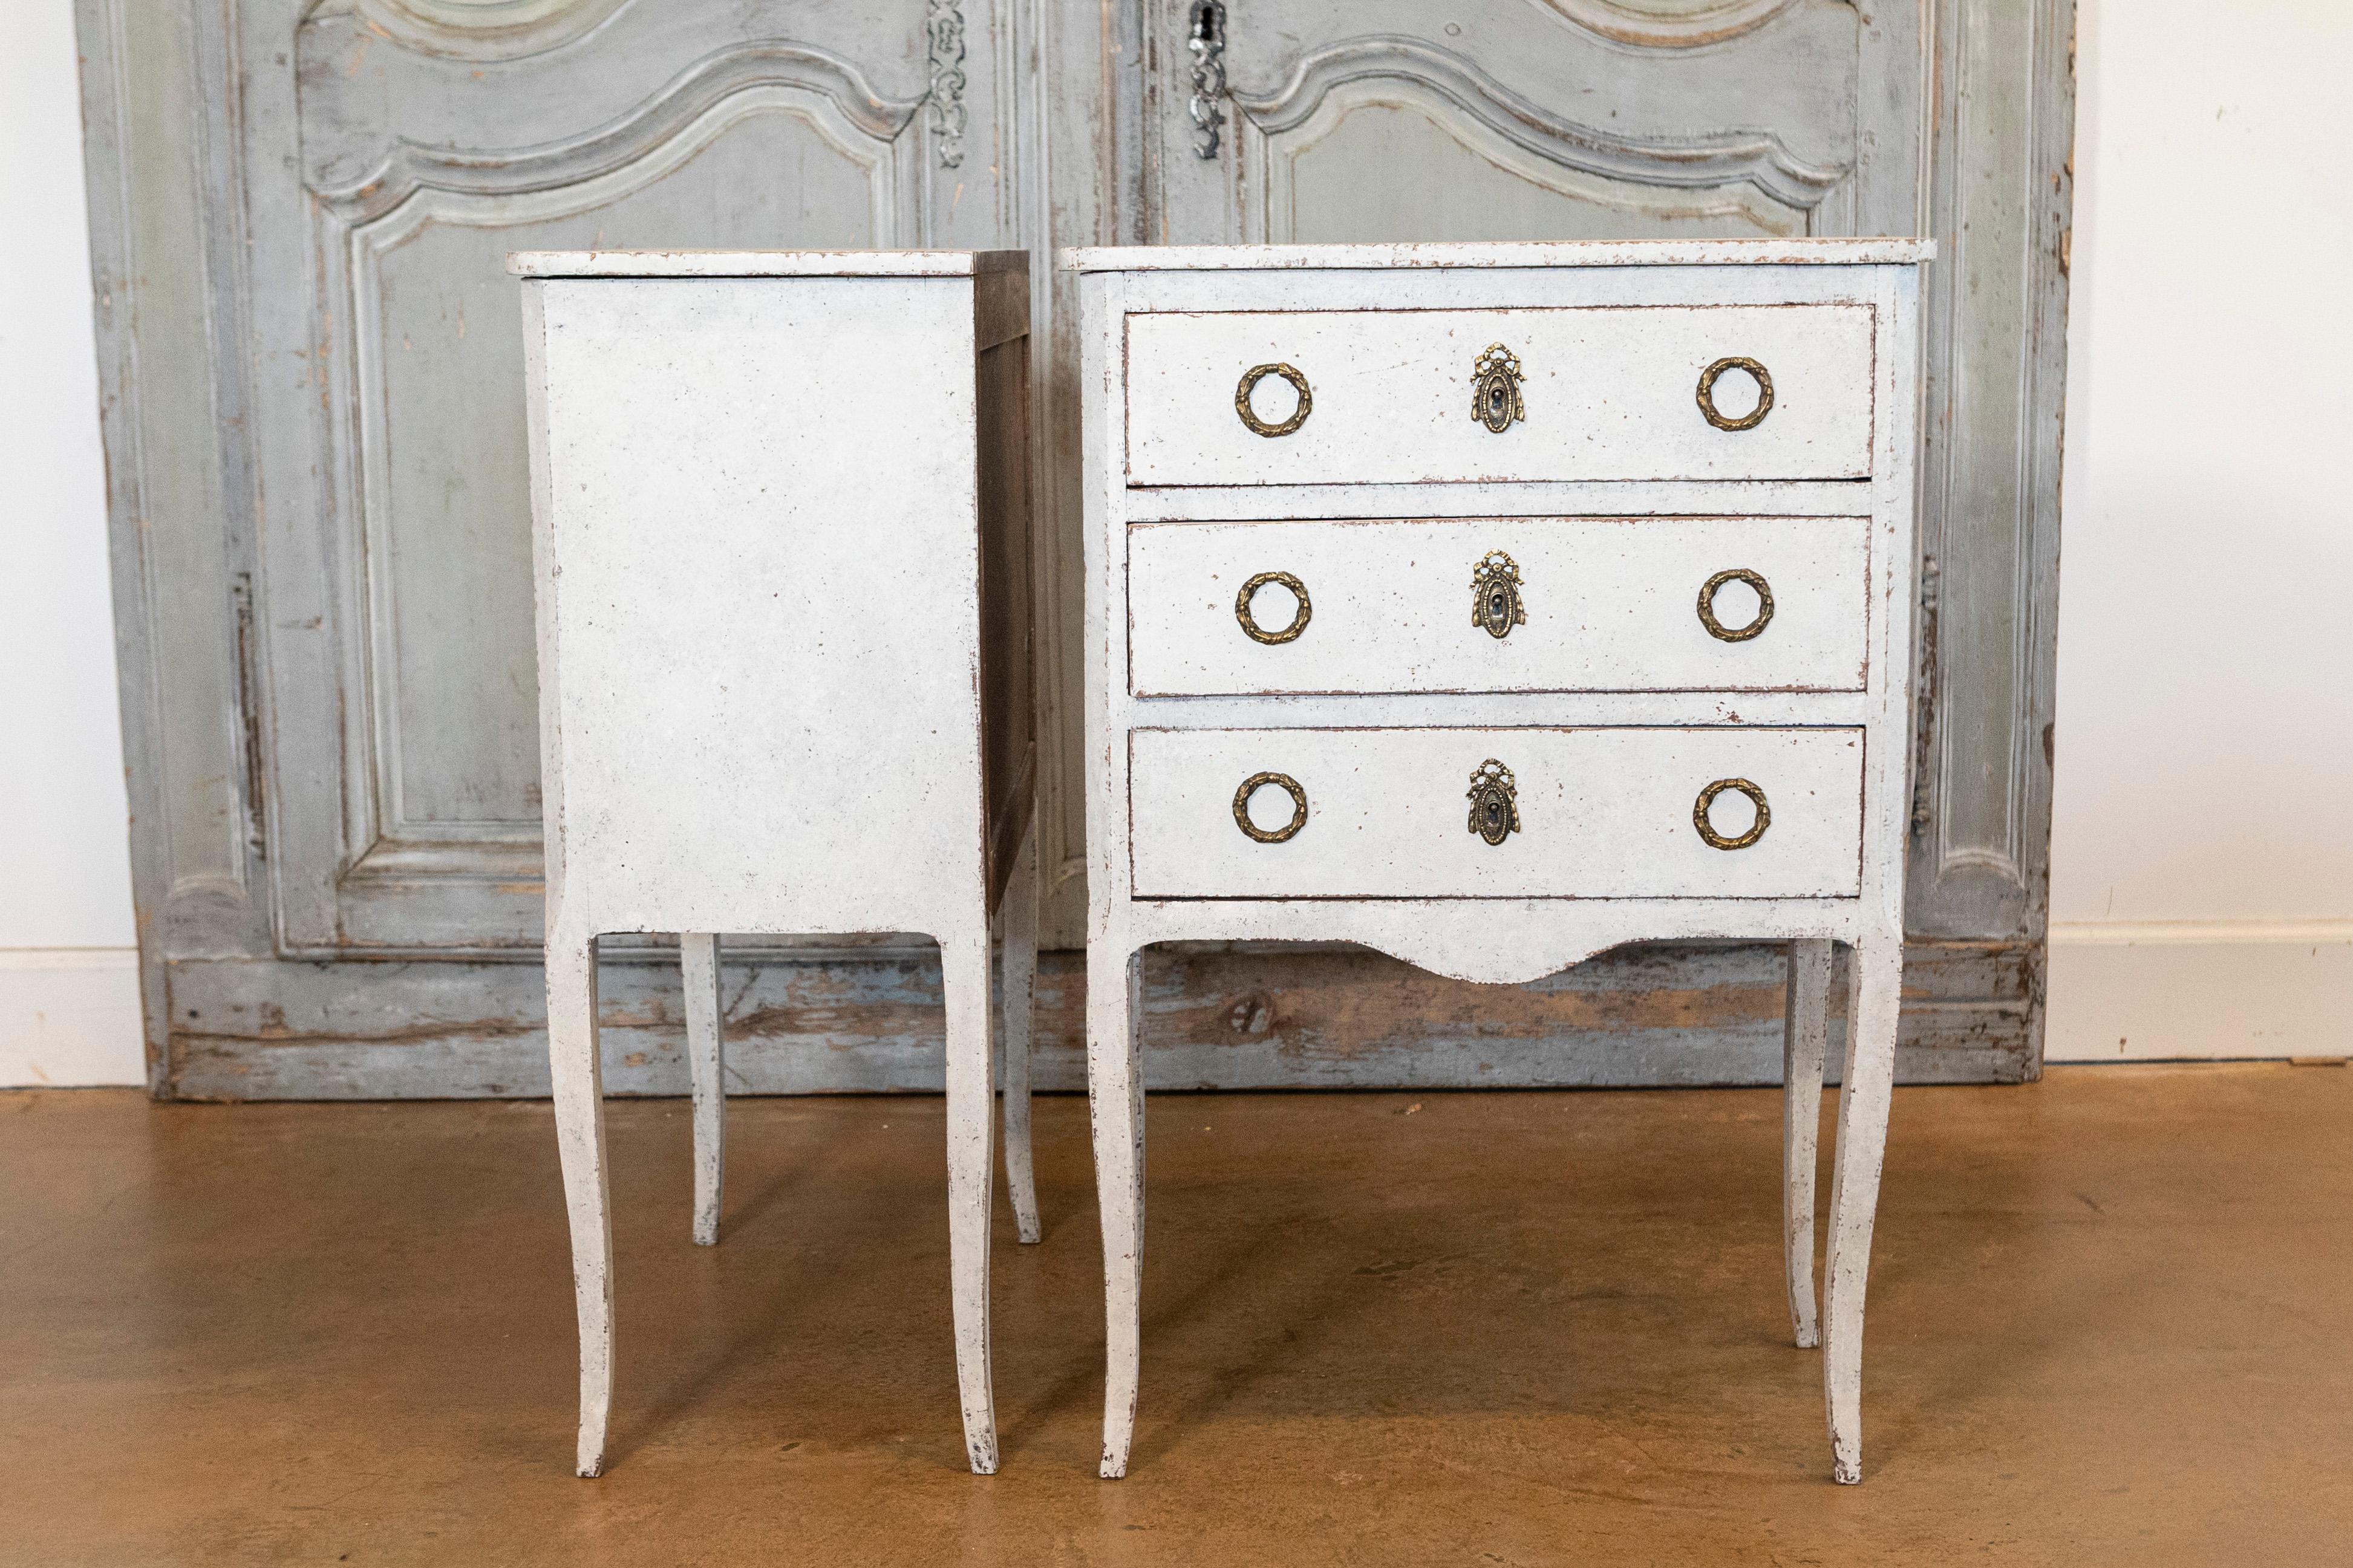 Carved Swedish Gray Painted Bedside Tables with Three Drawers and Cabriole Legs, a Pair For Sale